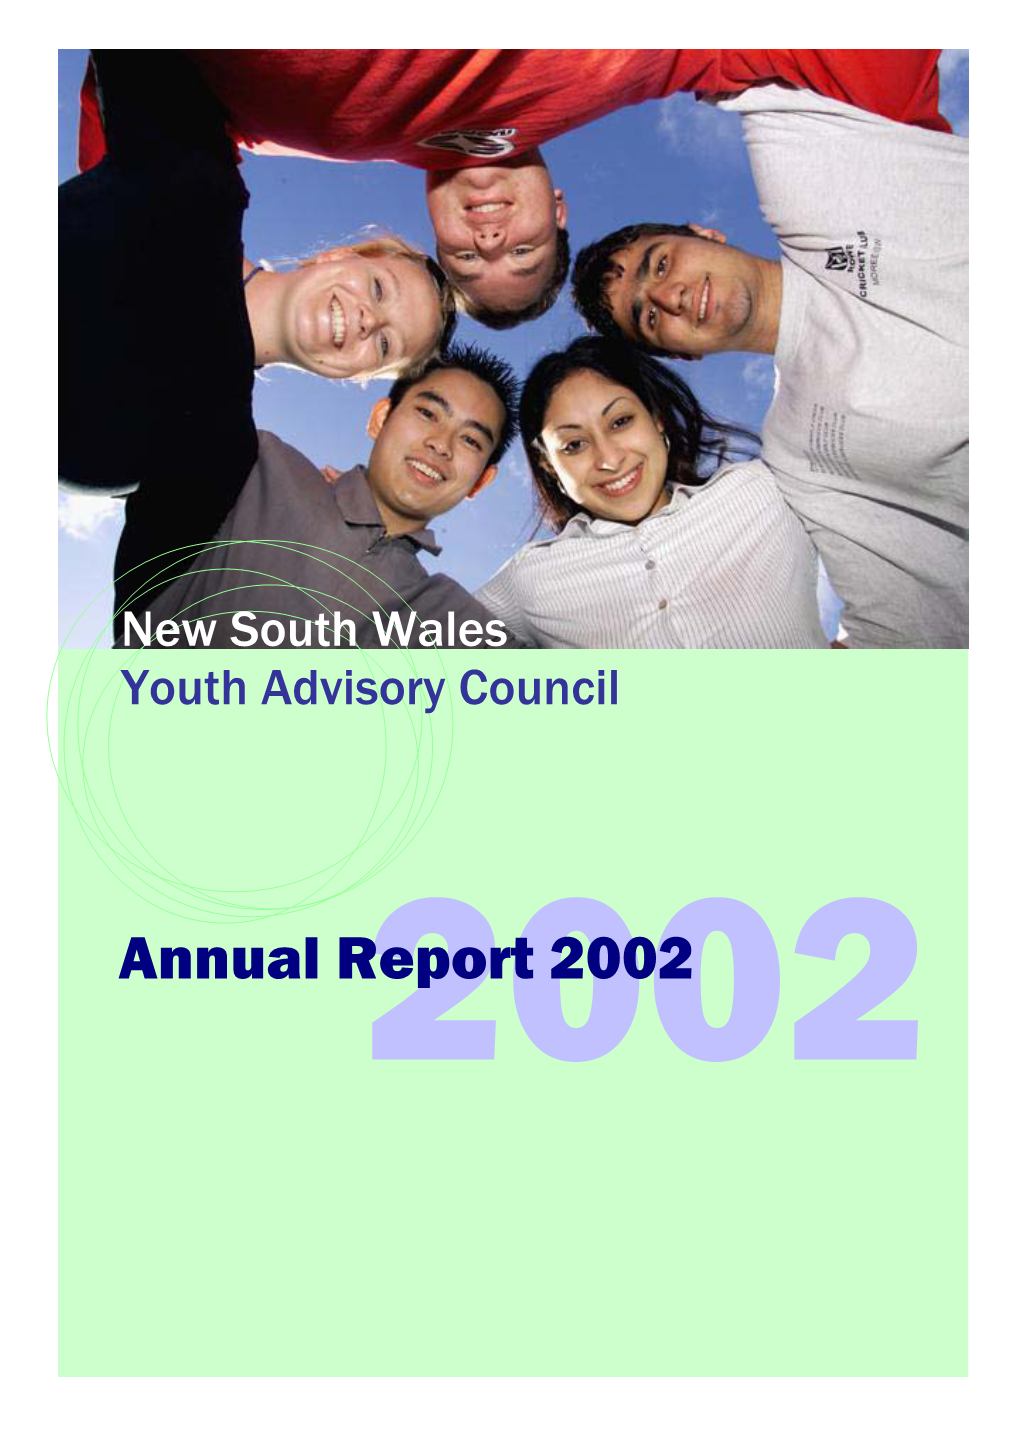 Youth Advisory Council Annual Report 2002